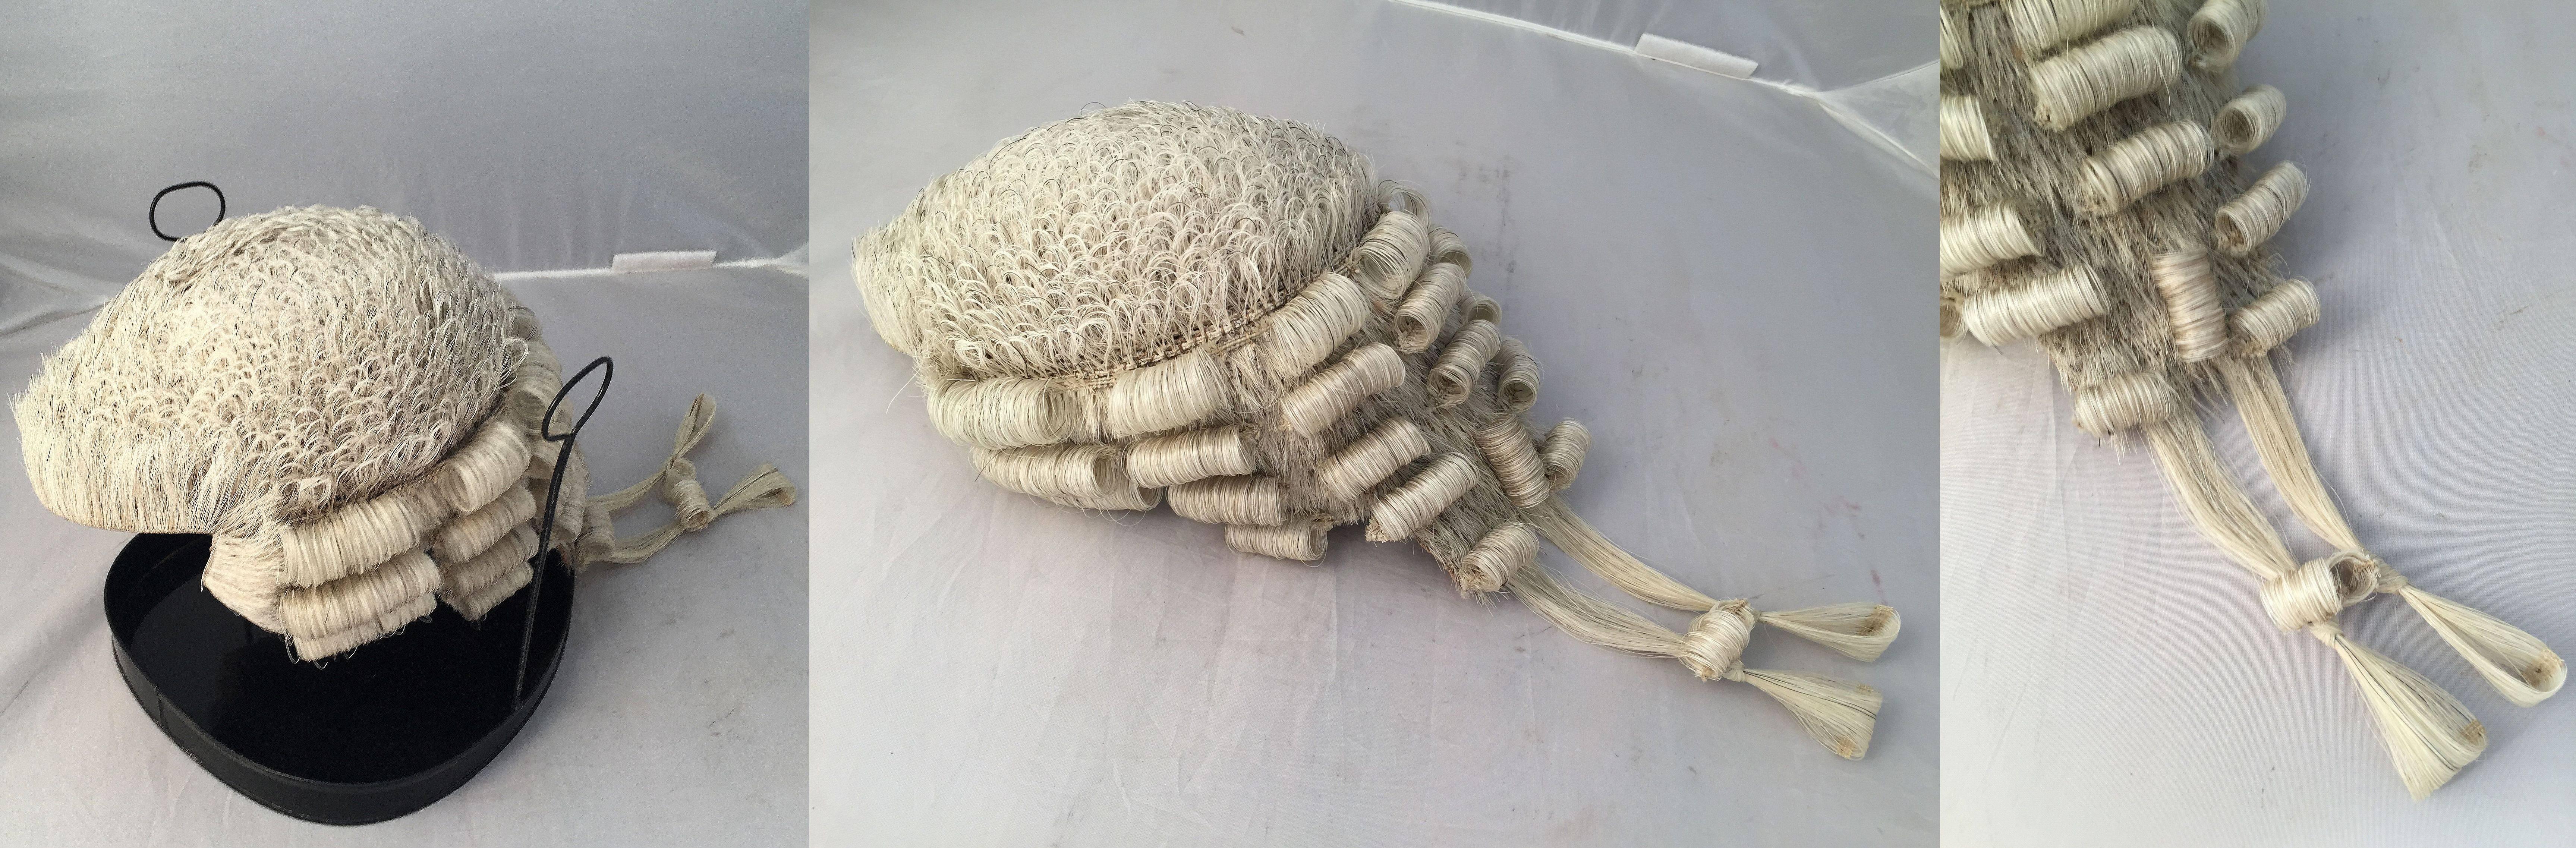 19th Century English Barrister's Wig in Tole Box with Riser by Ravenscroft Law